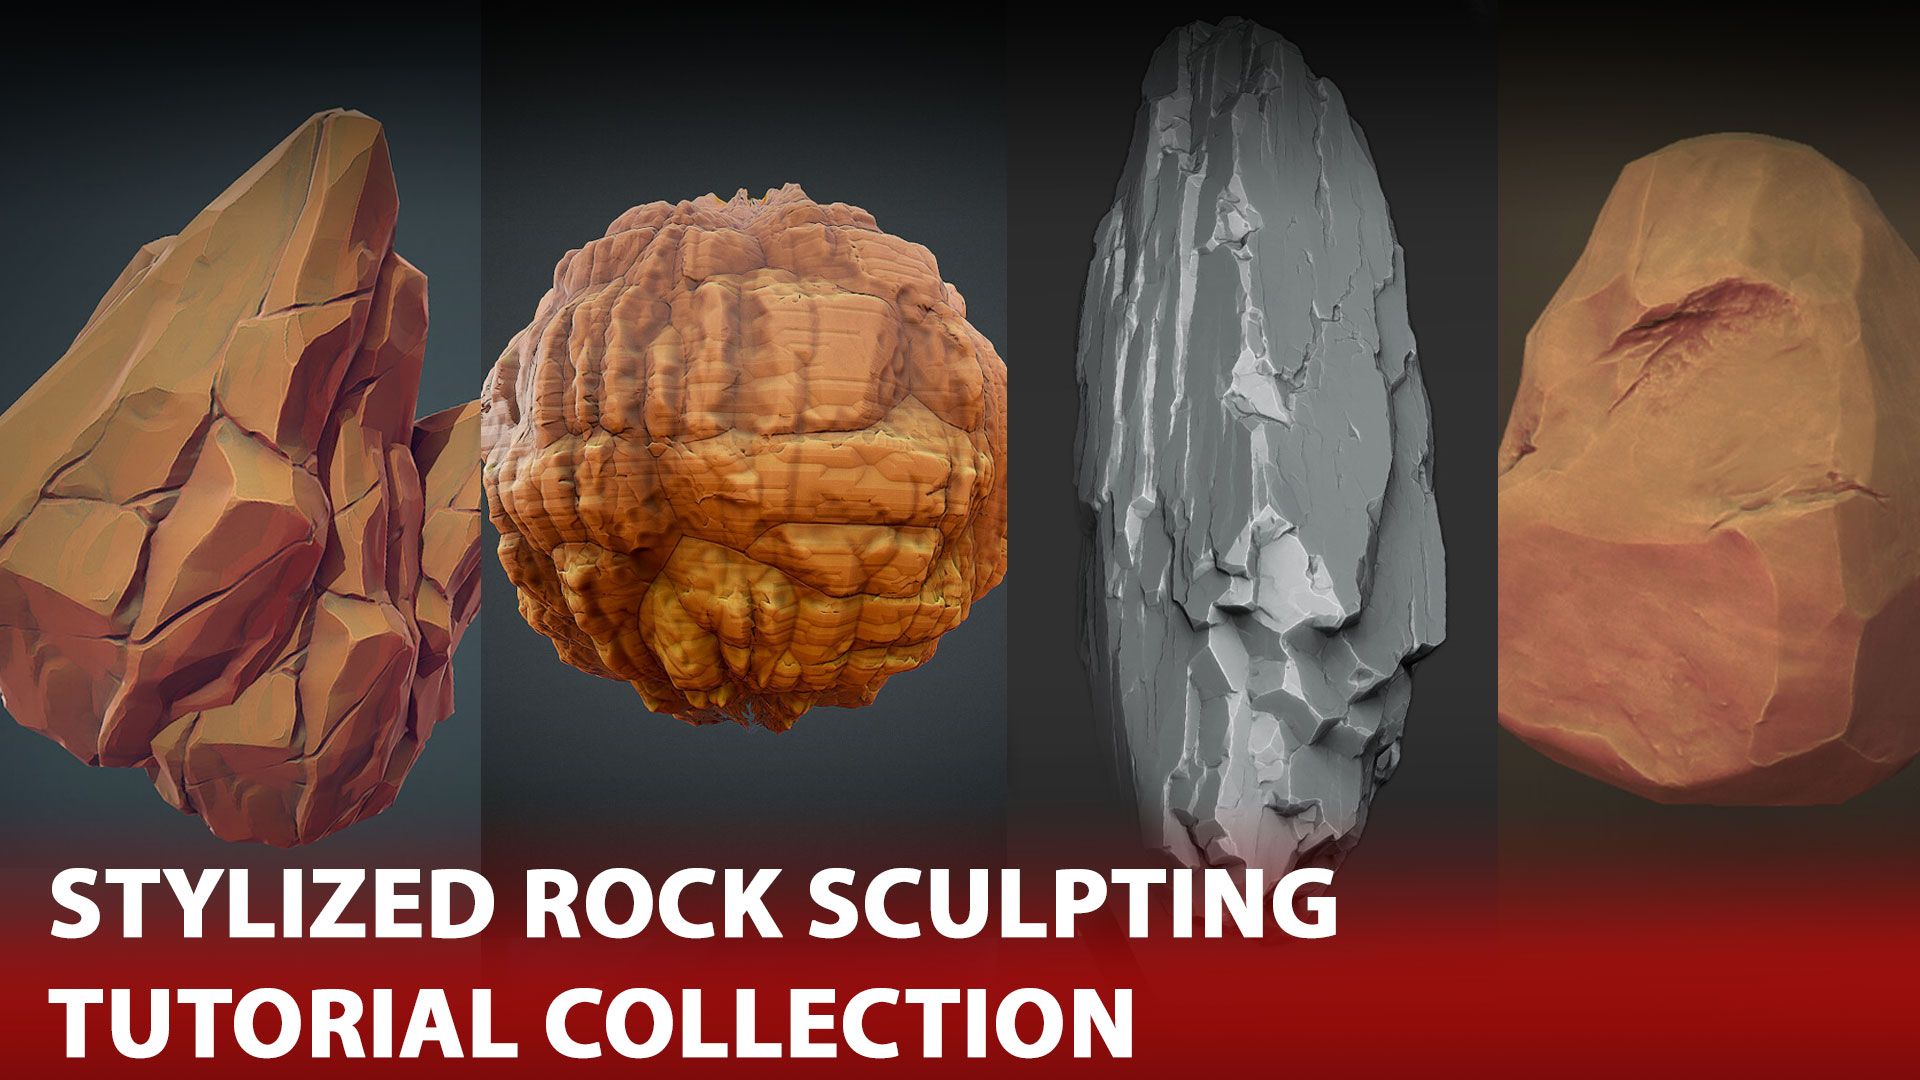 on "Want to discover Zbrush, Substance designer, Substance painter, Blender, .. in sculpting Rock stylized? Check out this collection for Sculpting #Stylized #rock #Substancepainter #Sculpt #Zbrush #Blender ...